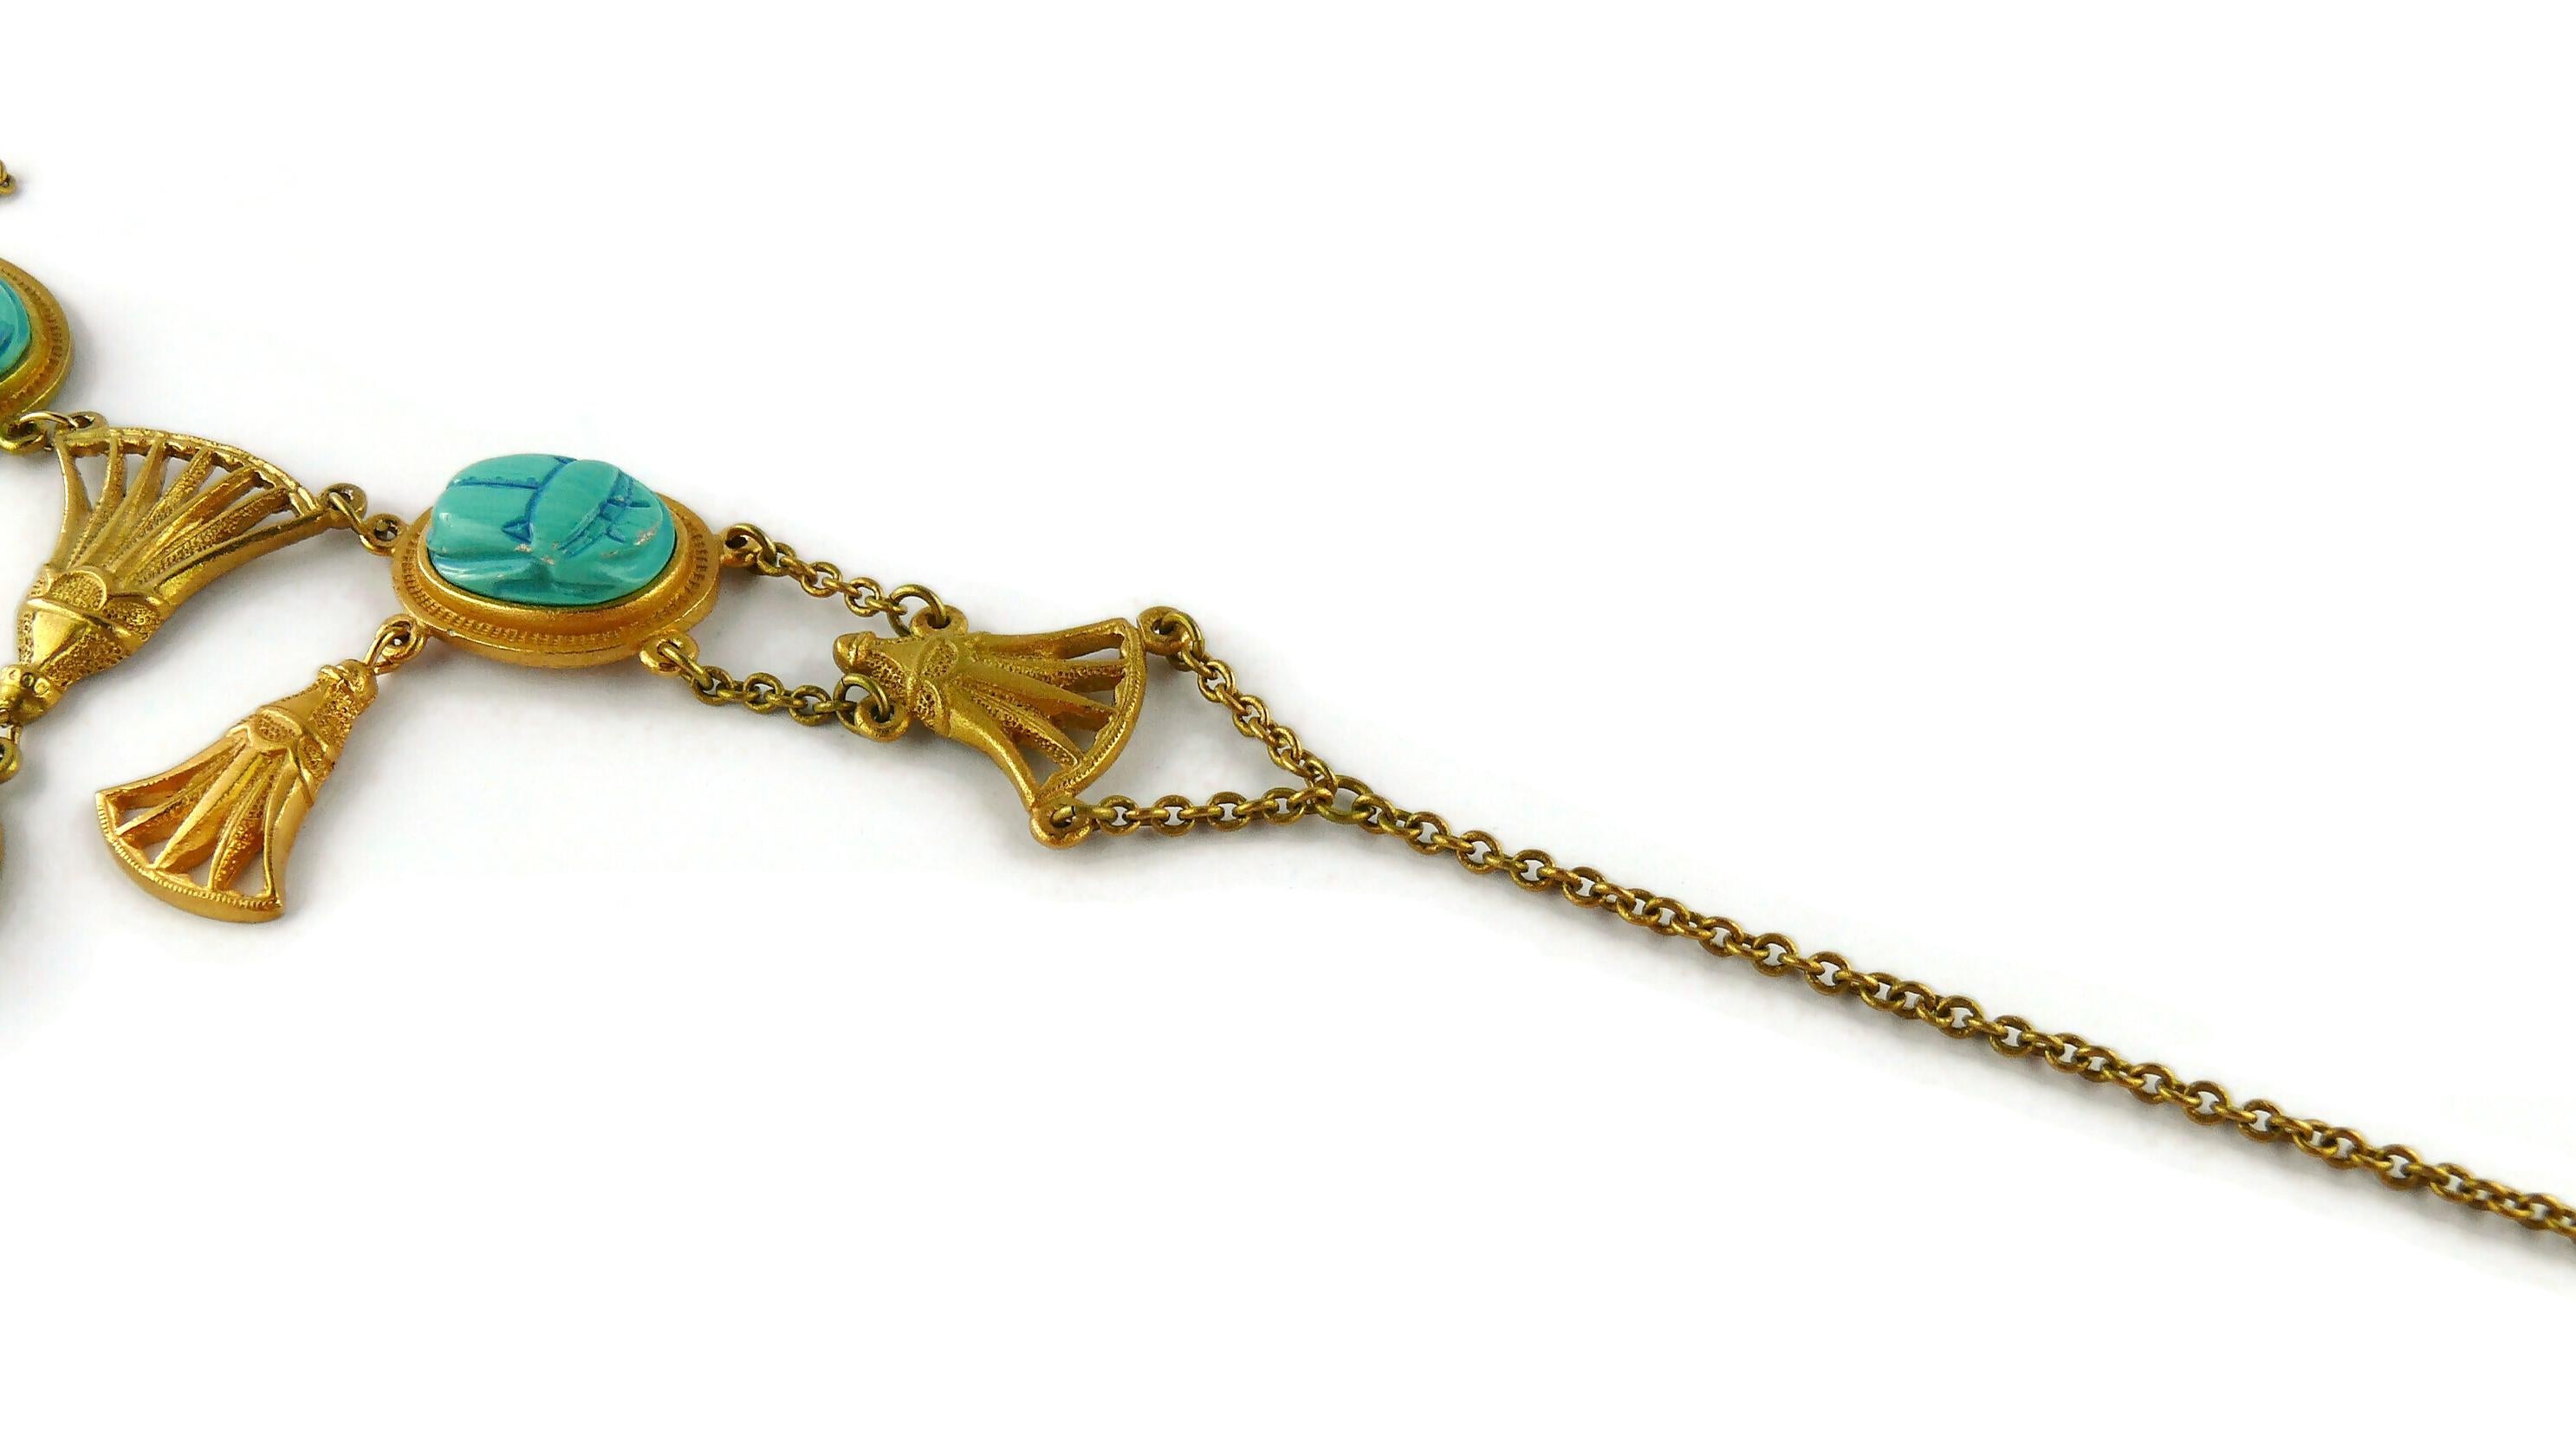 Christian Dior Egyptian Revival Faux Turquoise Scarab Necklace 2